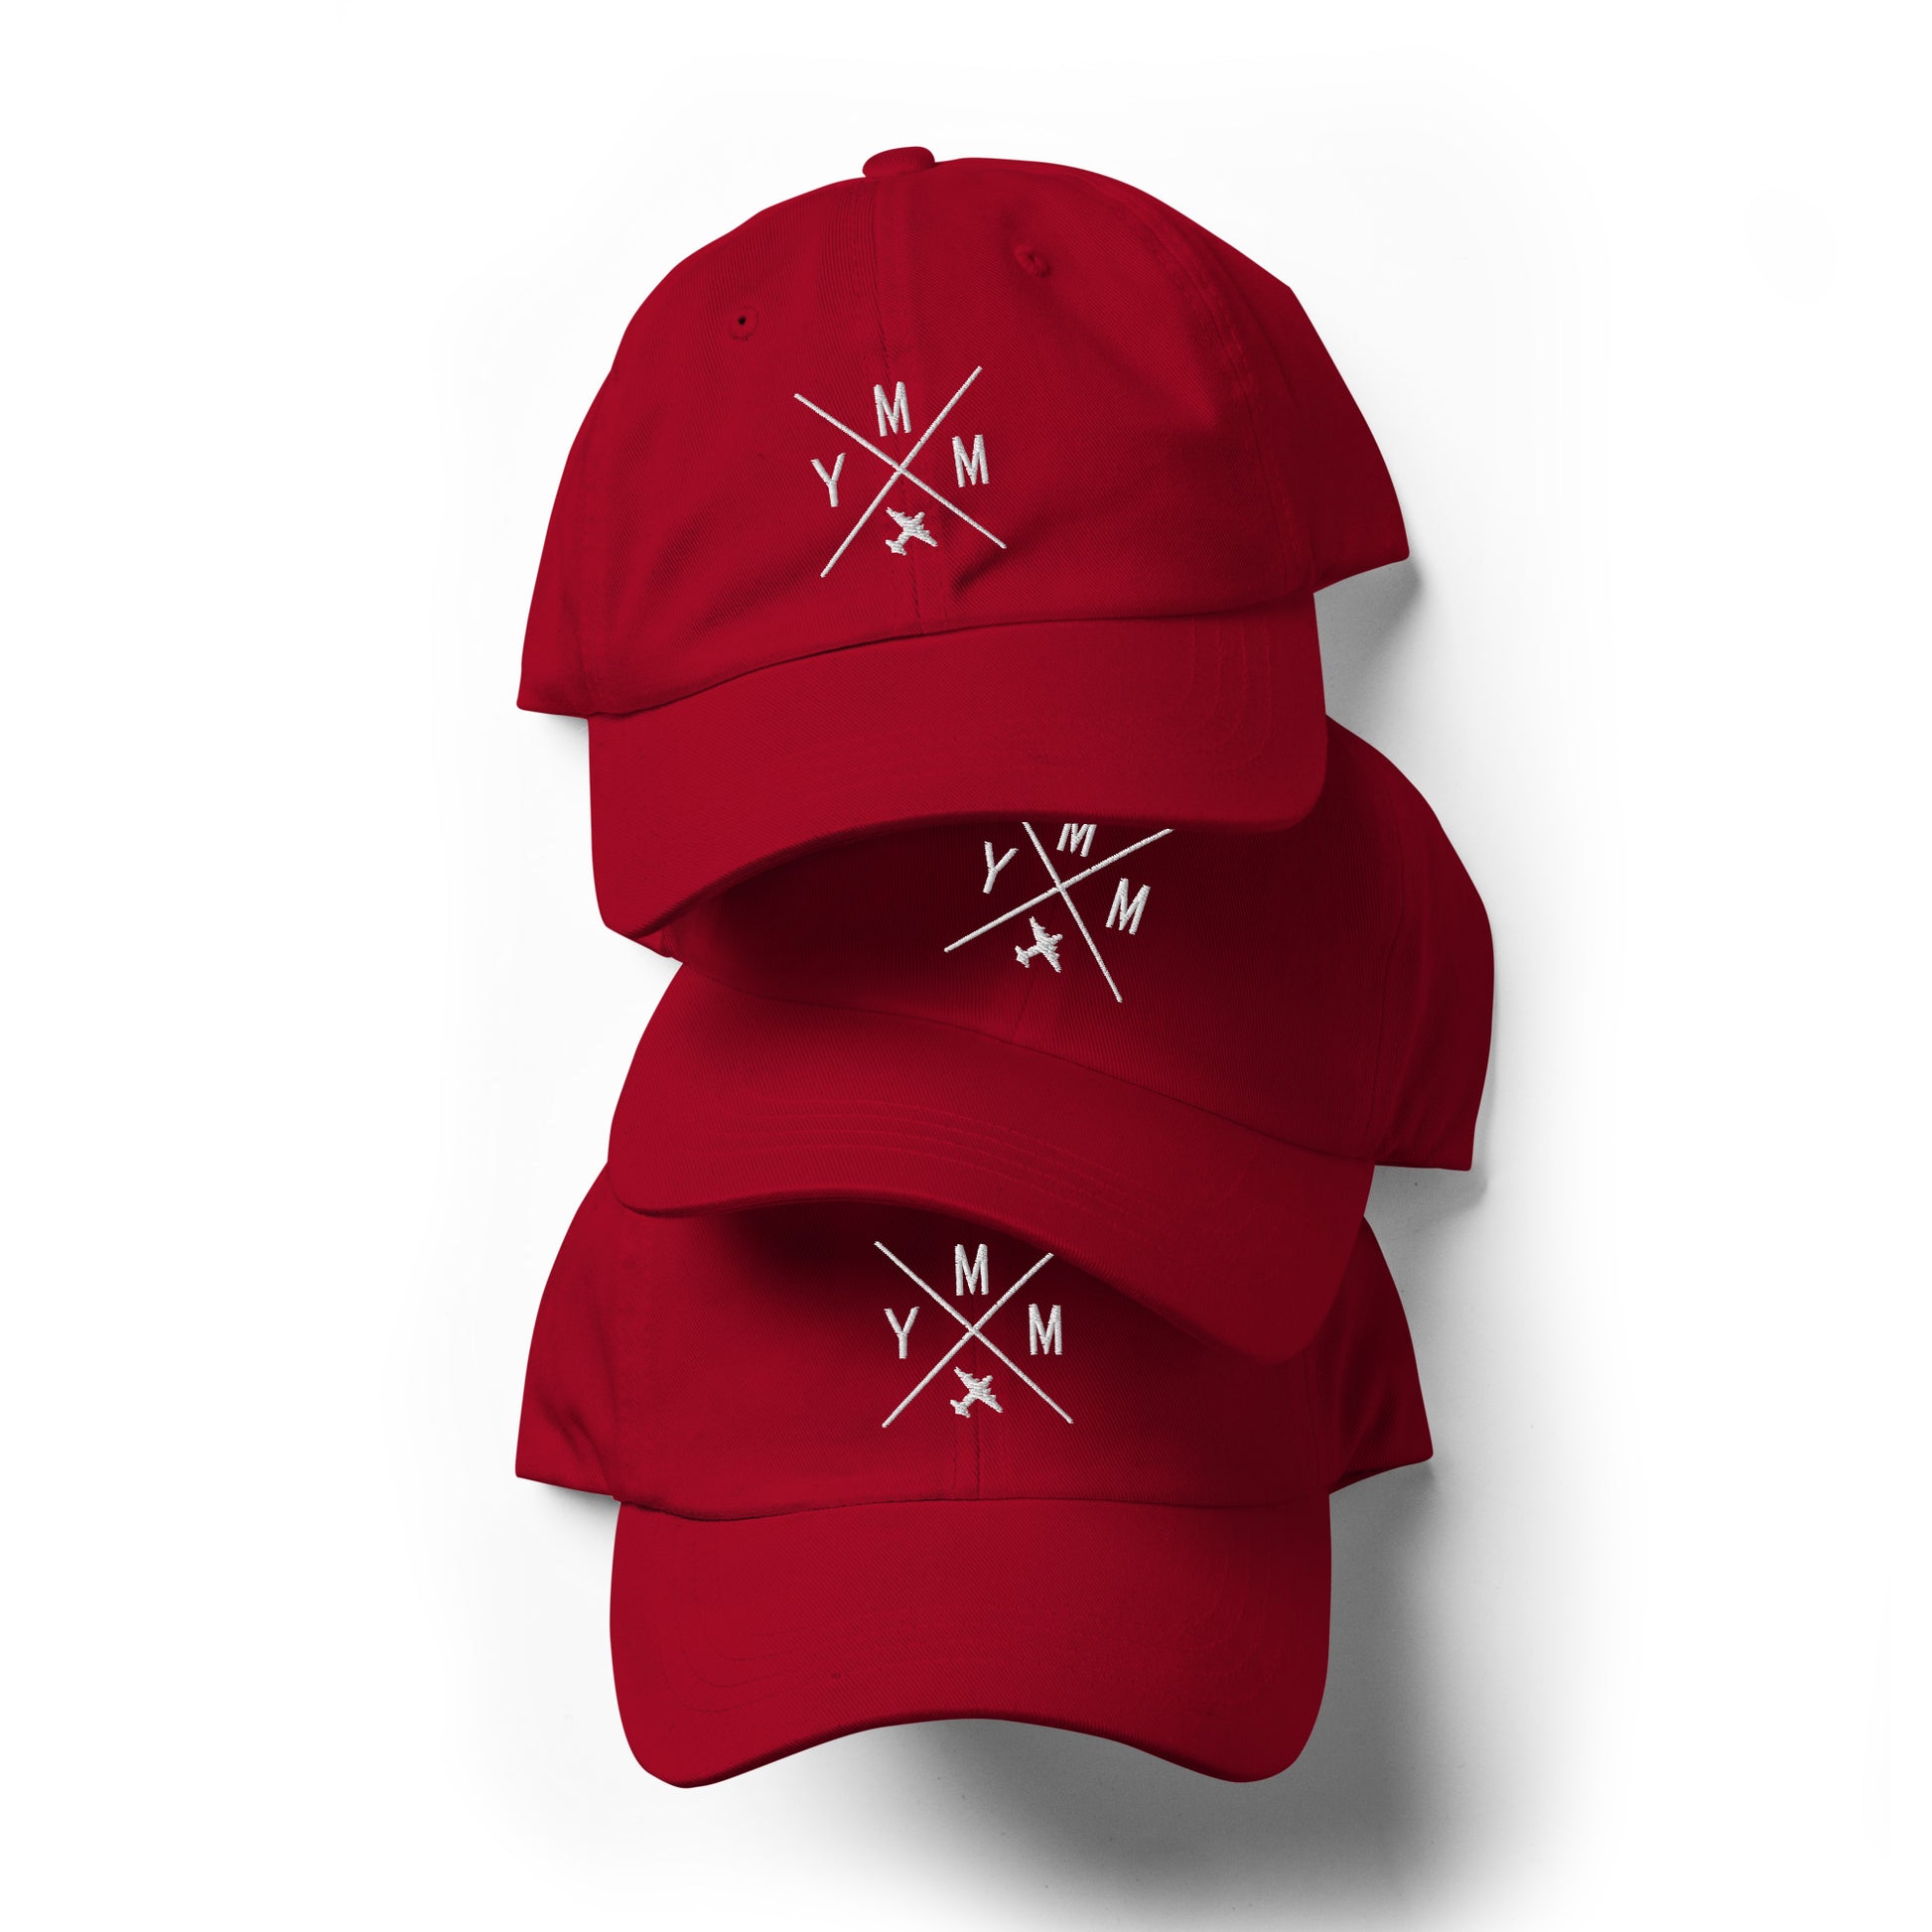 Crossed-X Dad Hat - White • YMM Fort McMurray • YHM Designs - Image 03